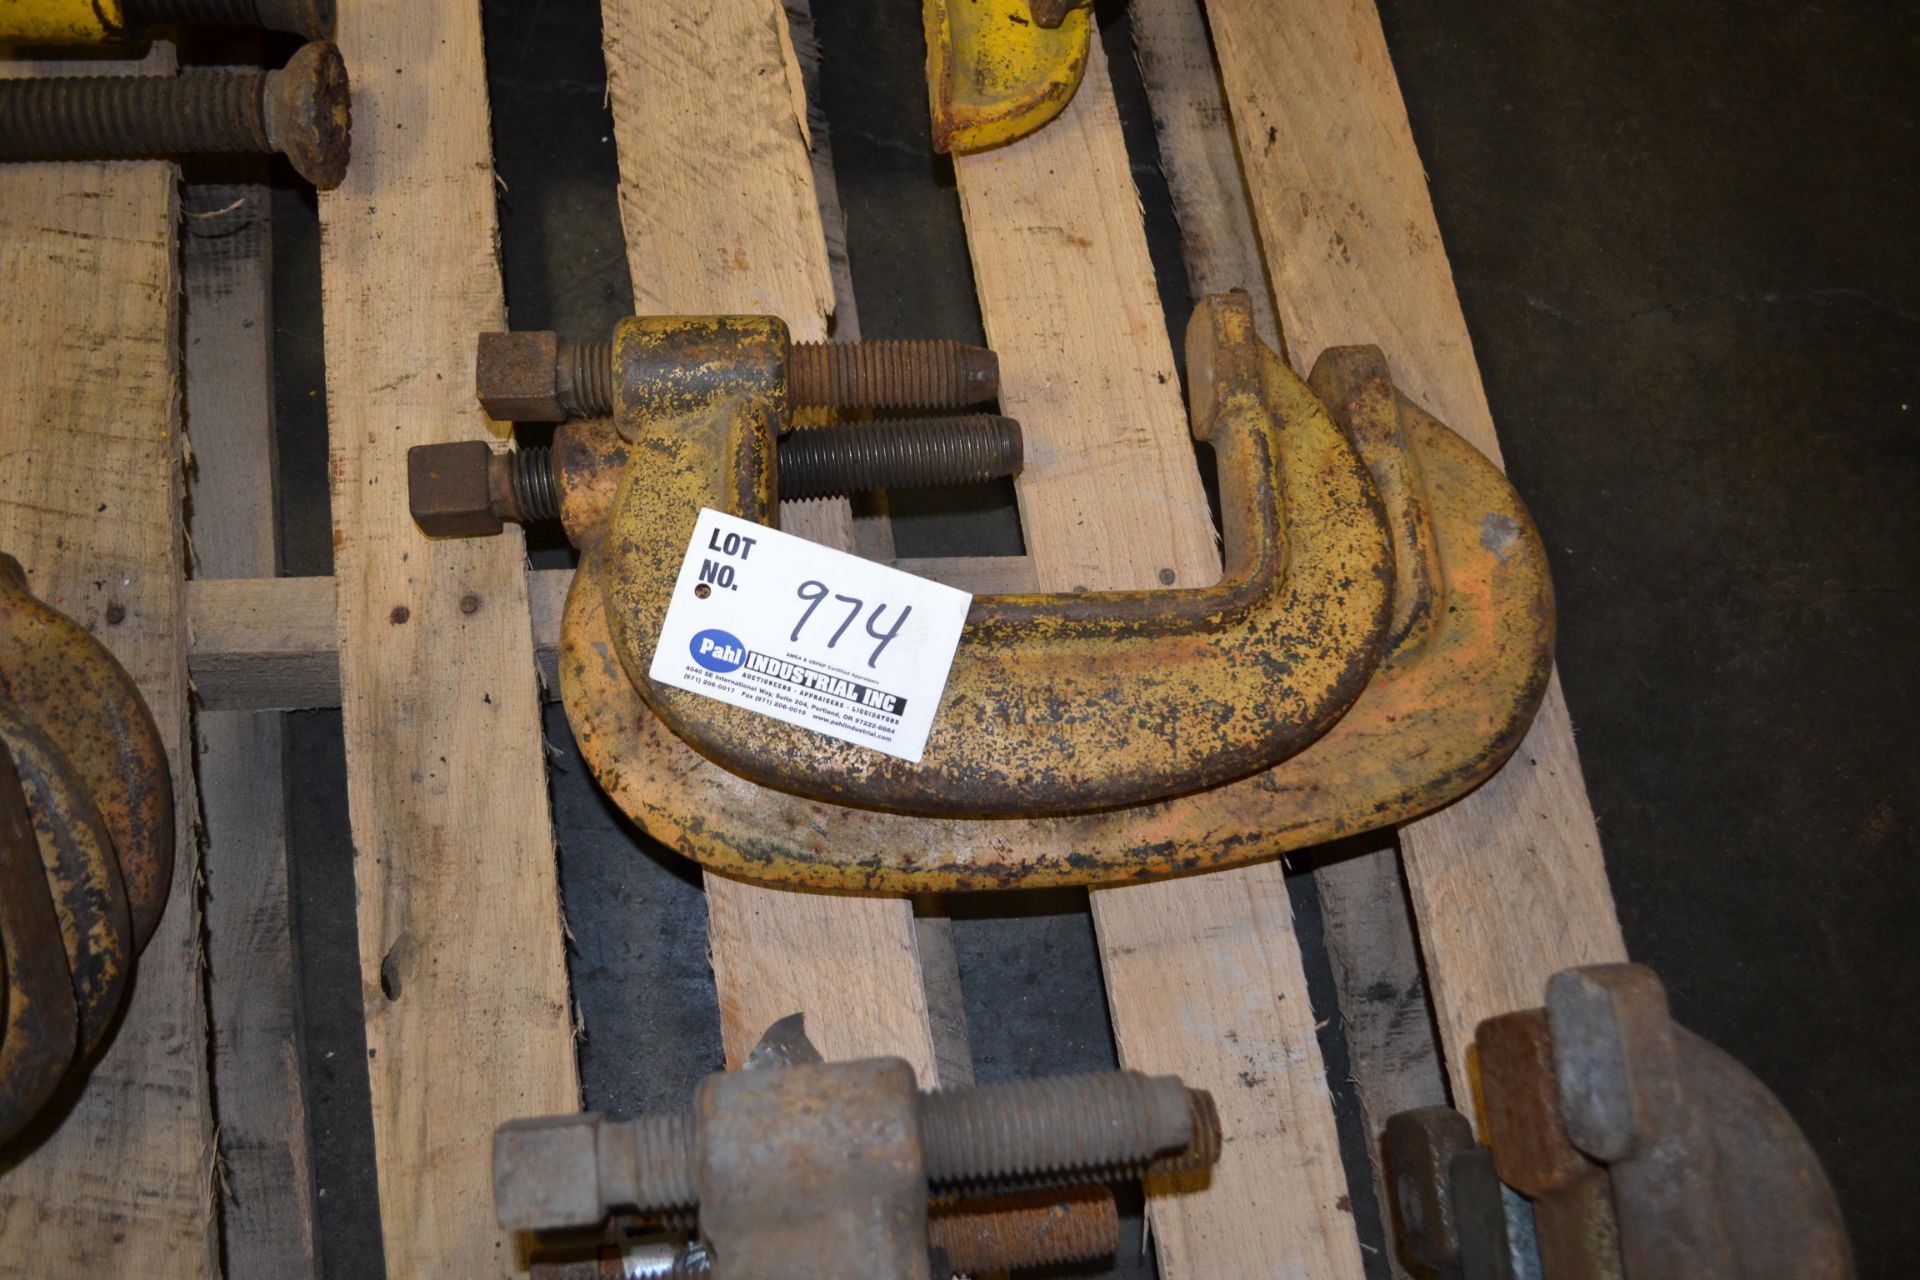 10" and 6 1/2" heavy duty c clamps